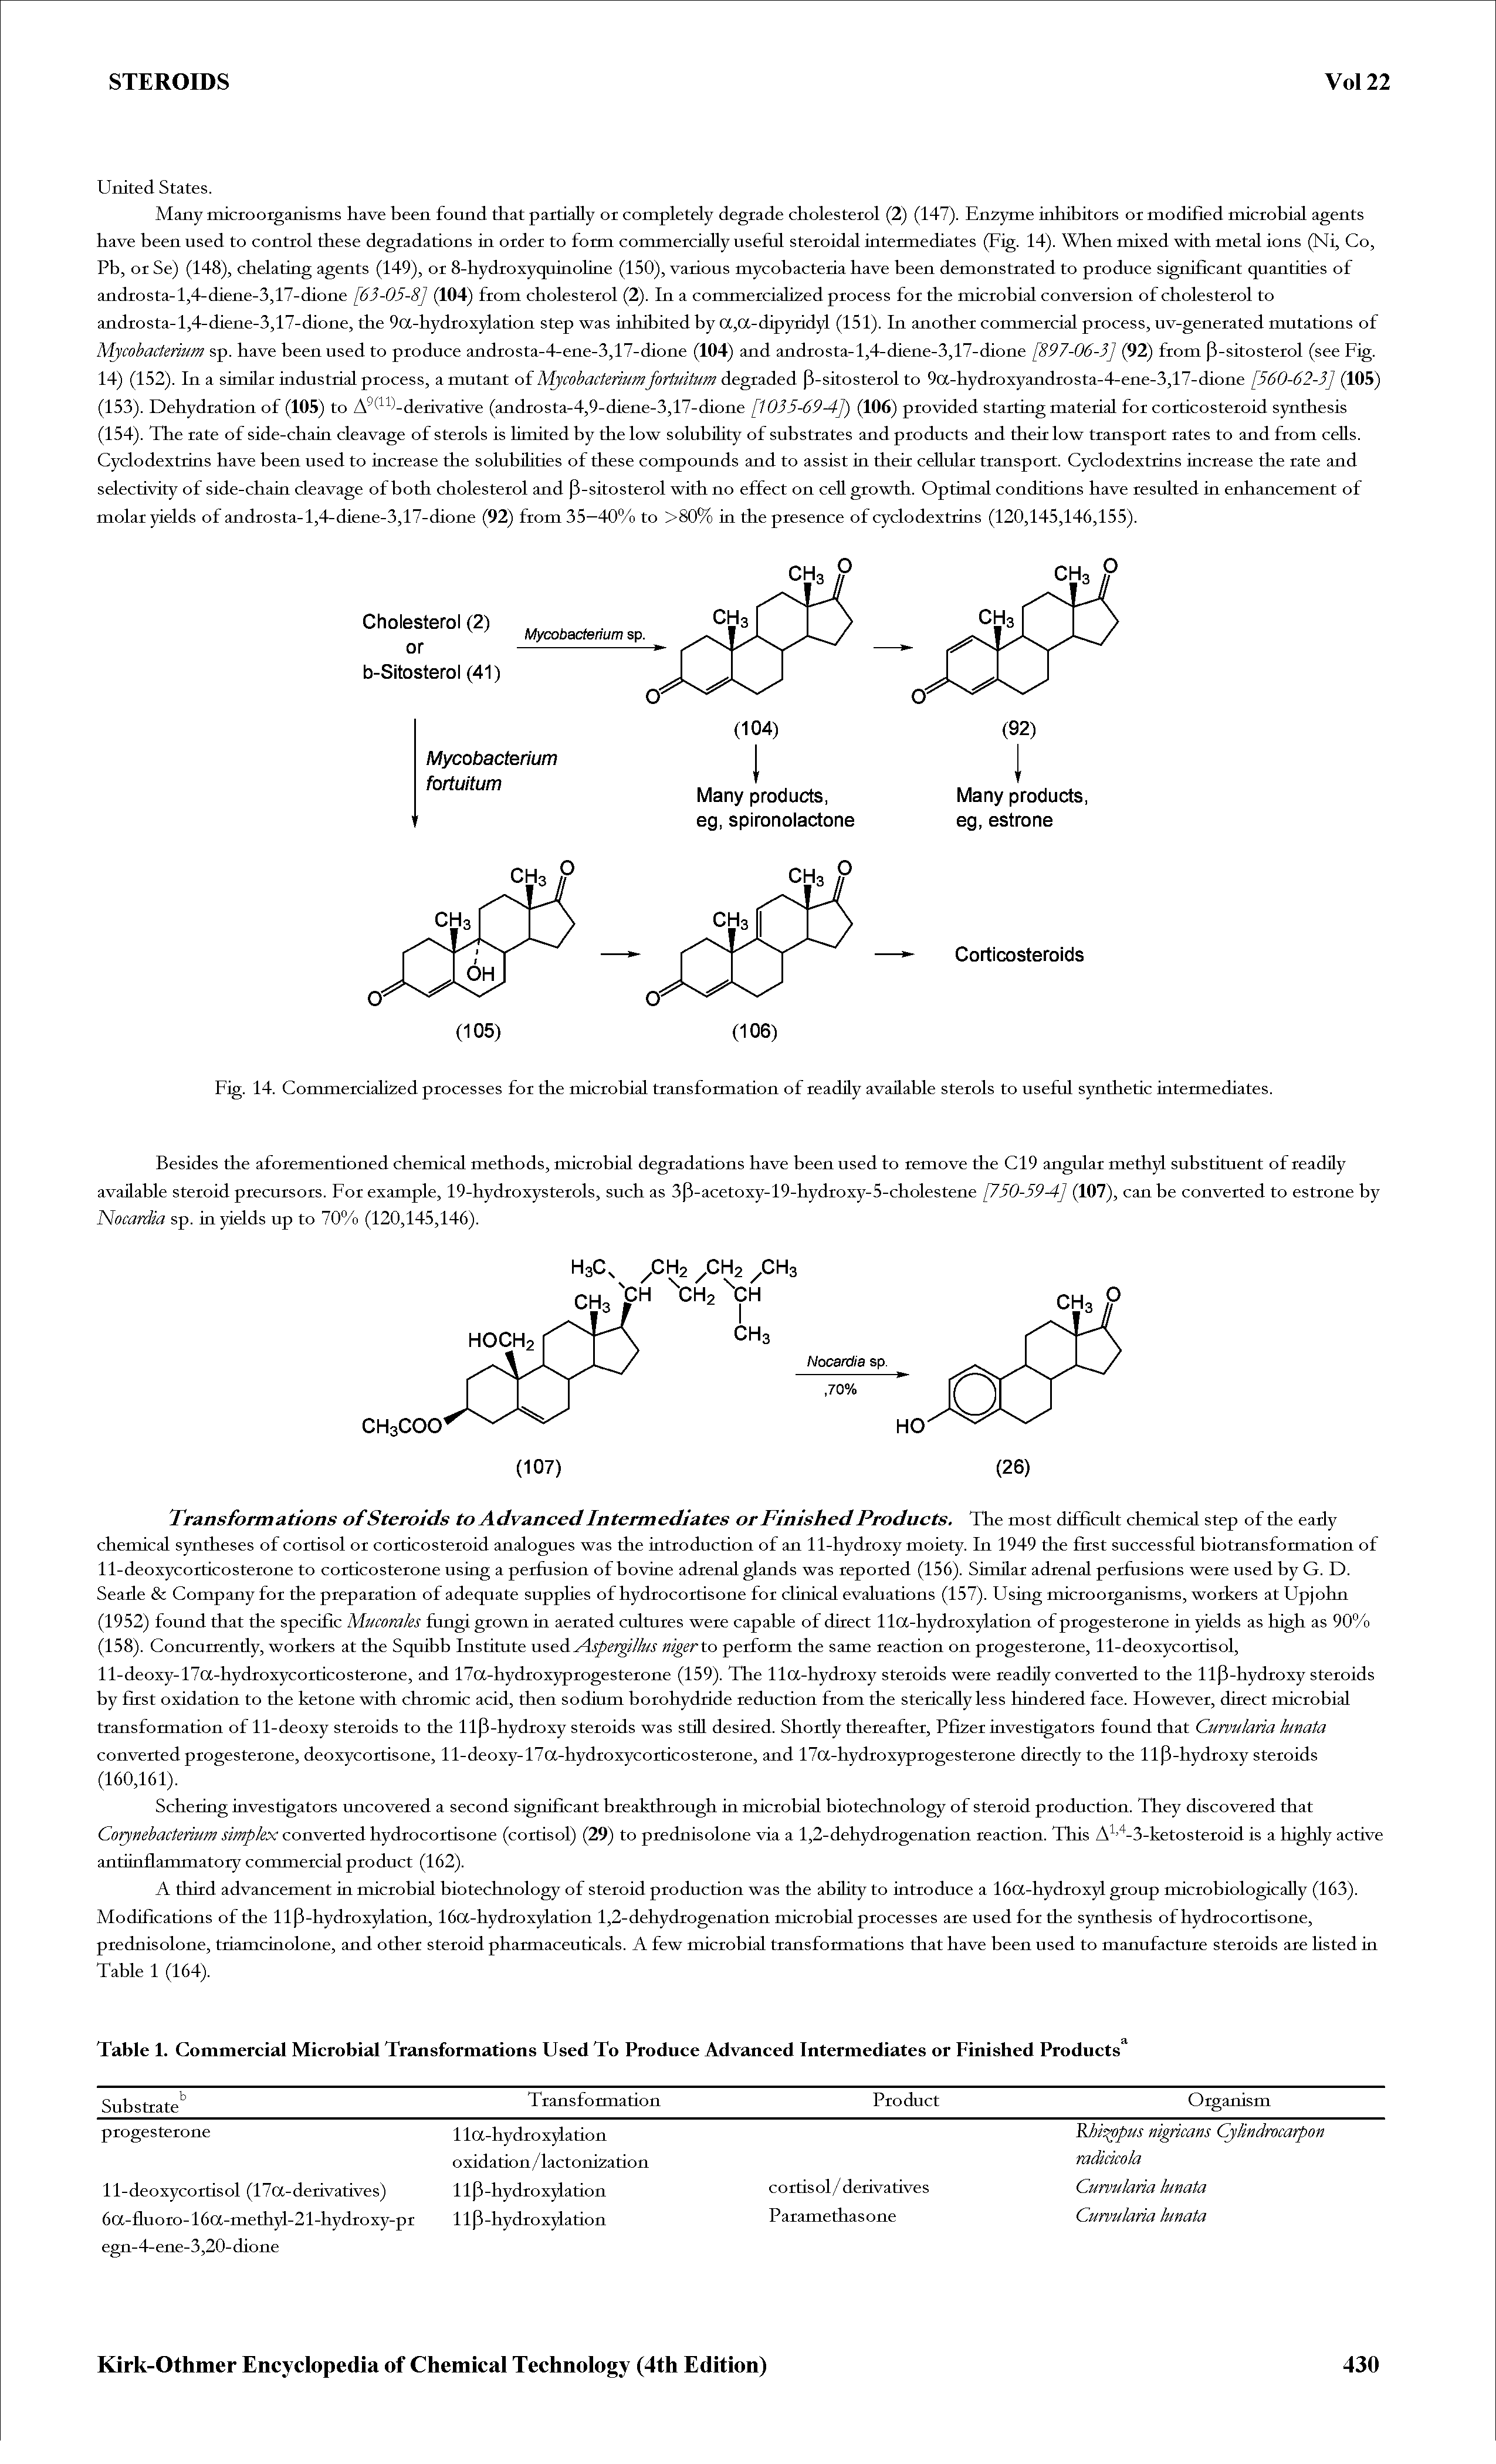 Fig. 14. Commercialized processes for the microbial transformation of readily available sterols to useful synthetic intermediates.